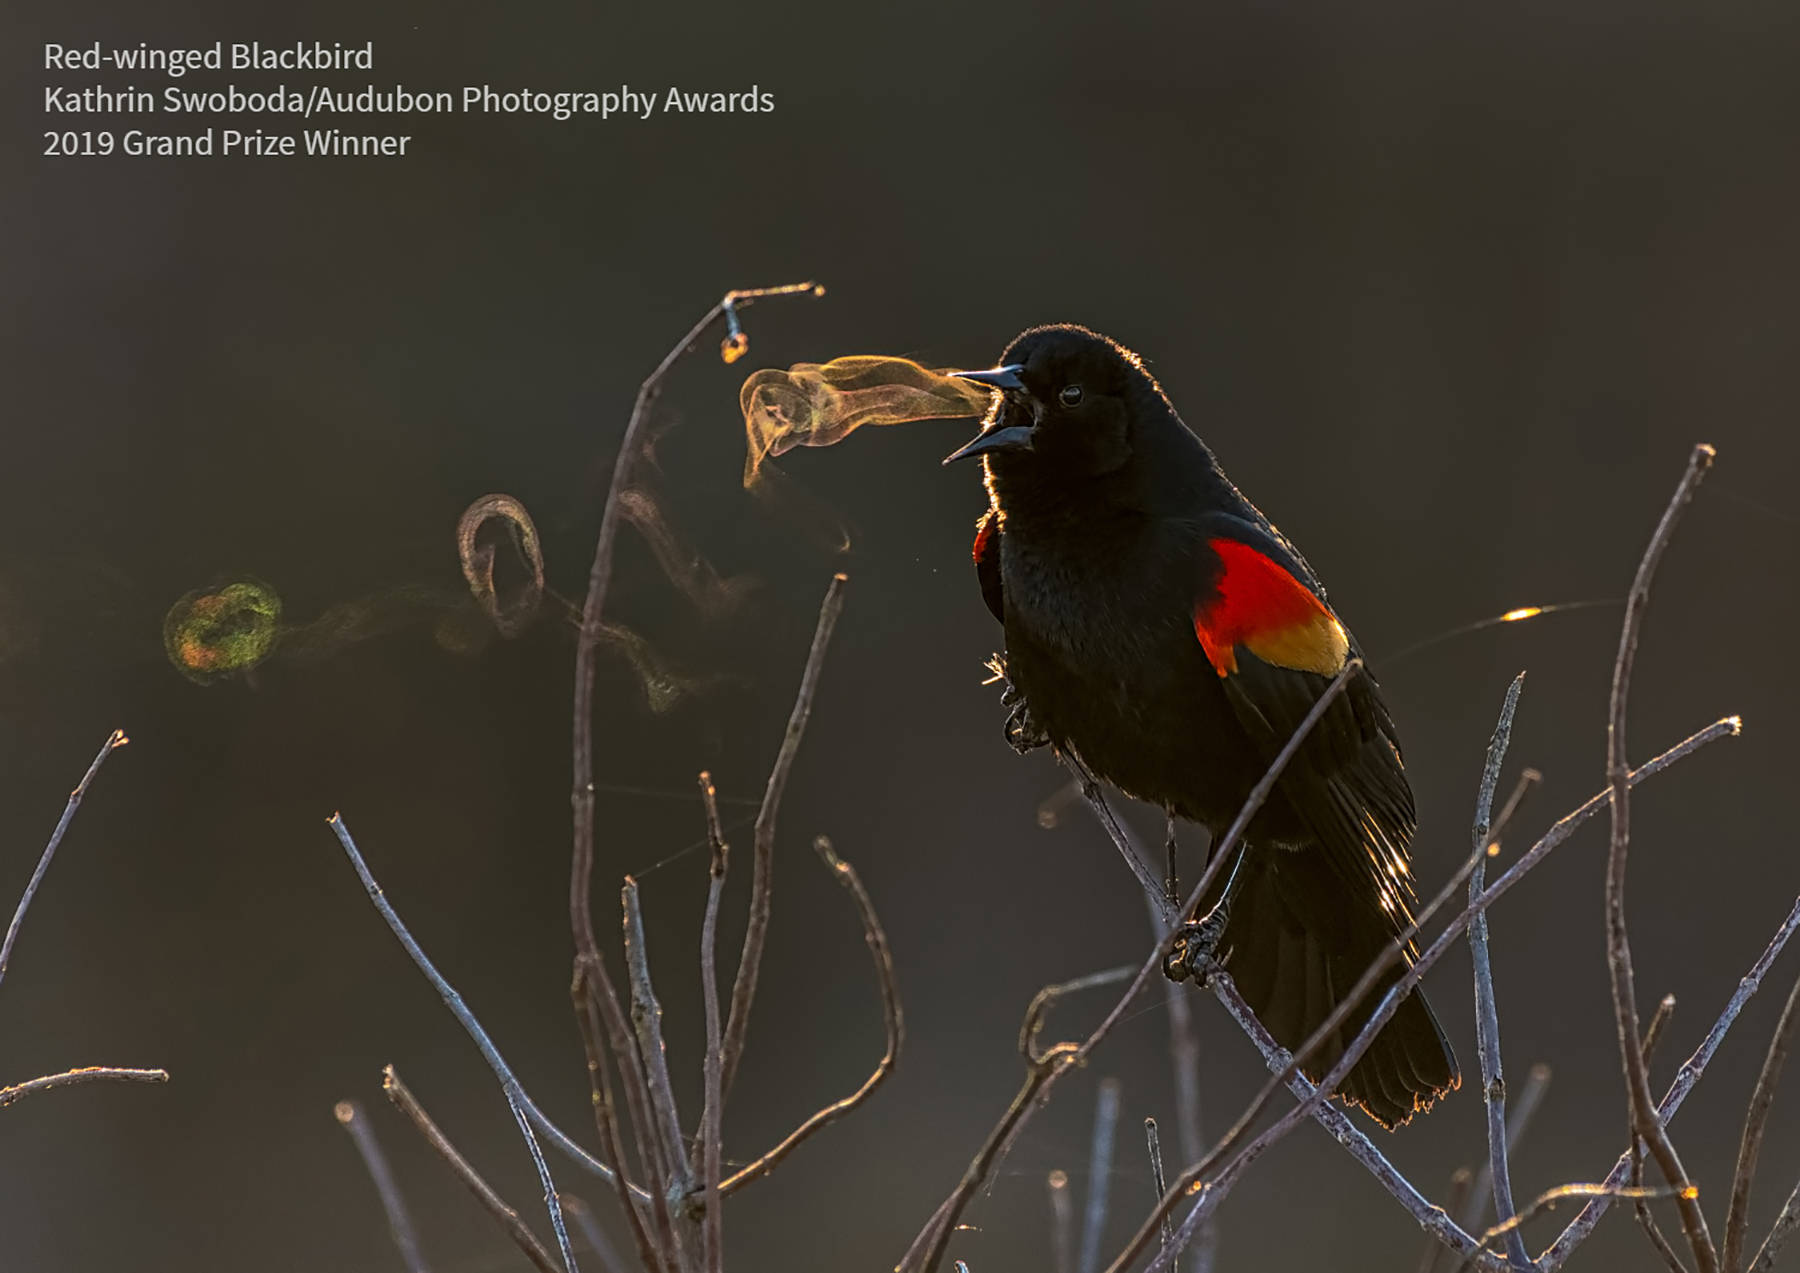 Kathrin Swoboda’s photo of a Red-winged Blackbird is the grand prize winner of the 2019 Audubon Photography Awards, to be on digital display through the City of Sequim’s website starting April 3. Submitted photo